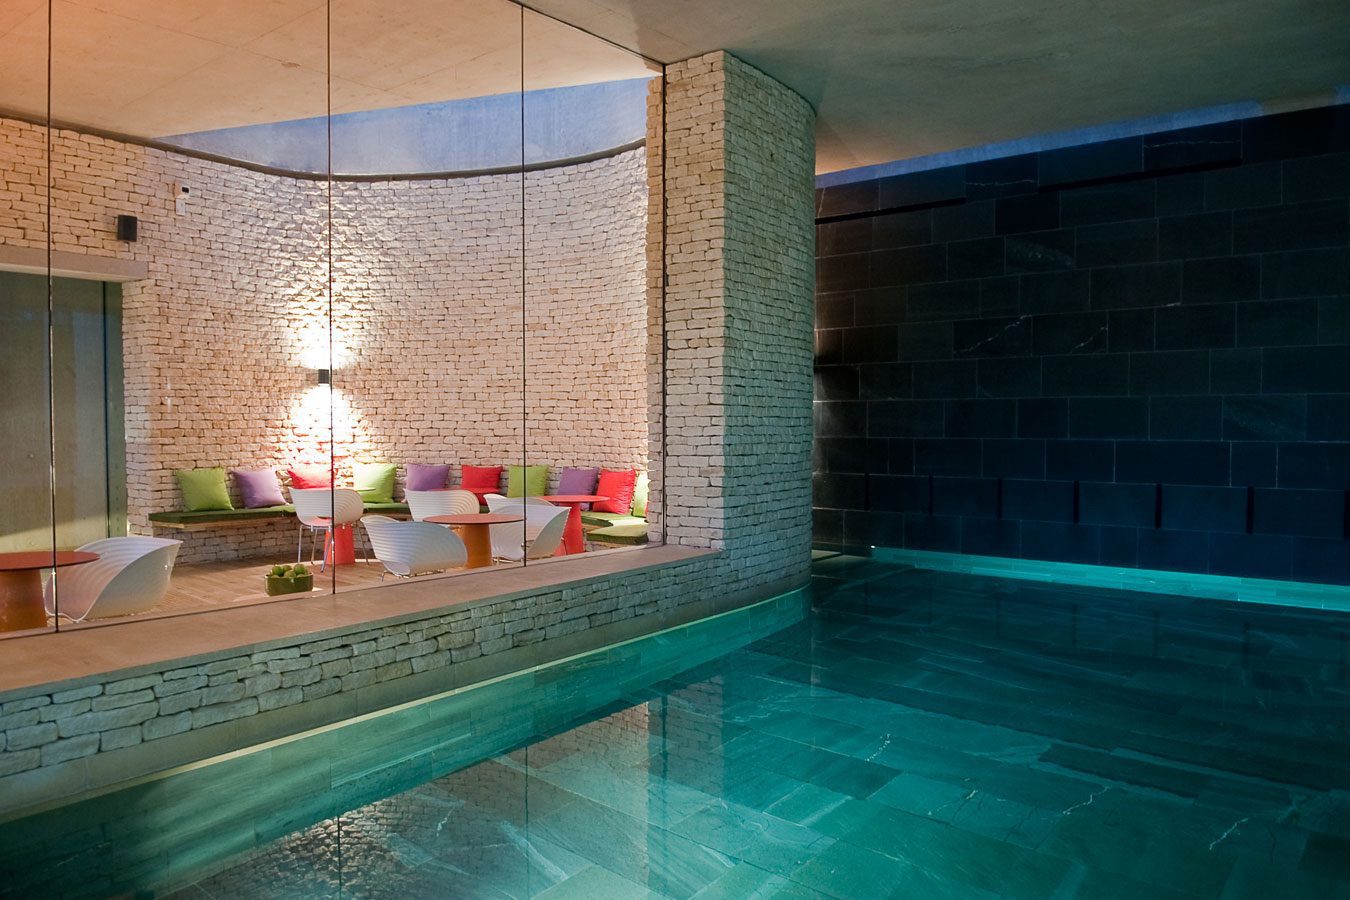 Review: We Check in to Cowley Manor & C-Side Spa